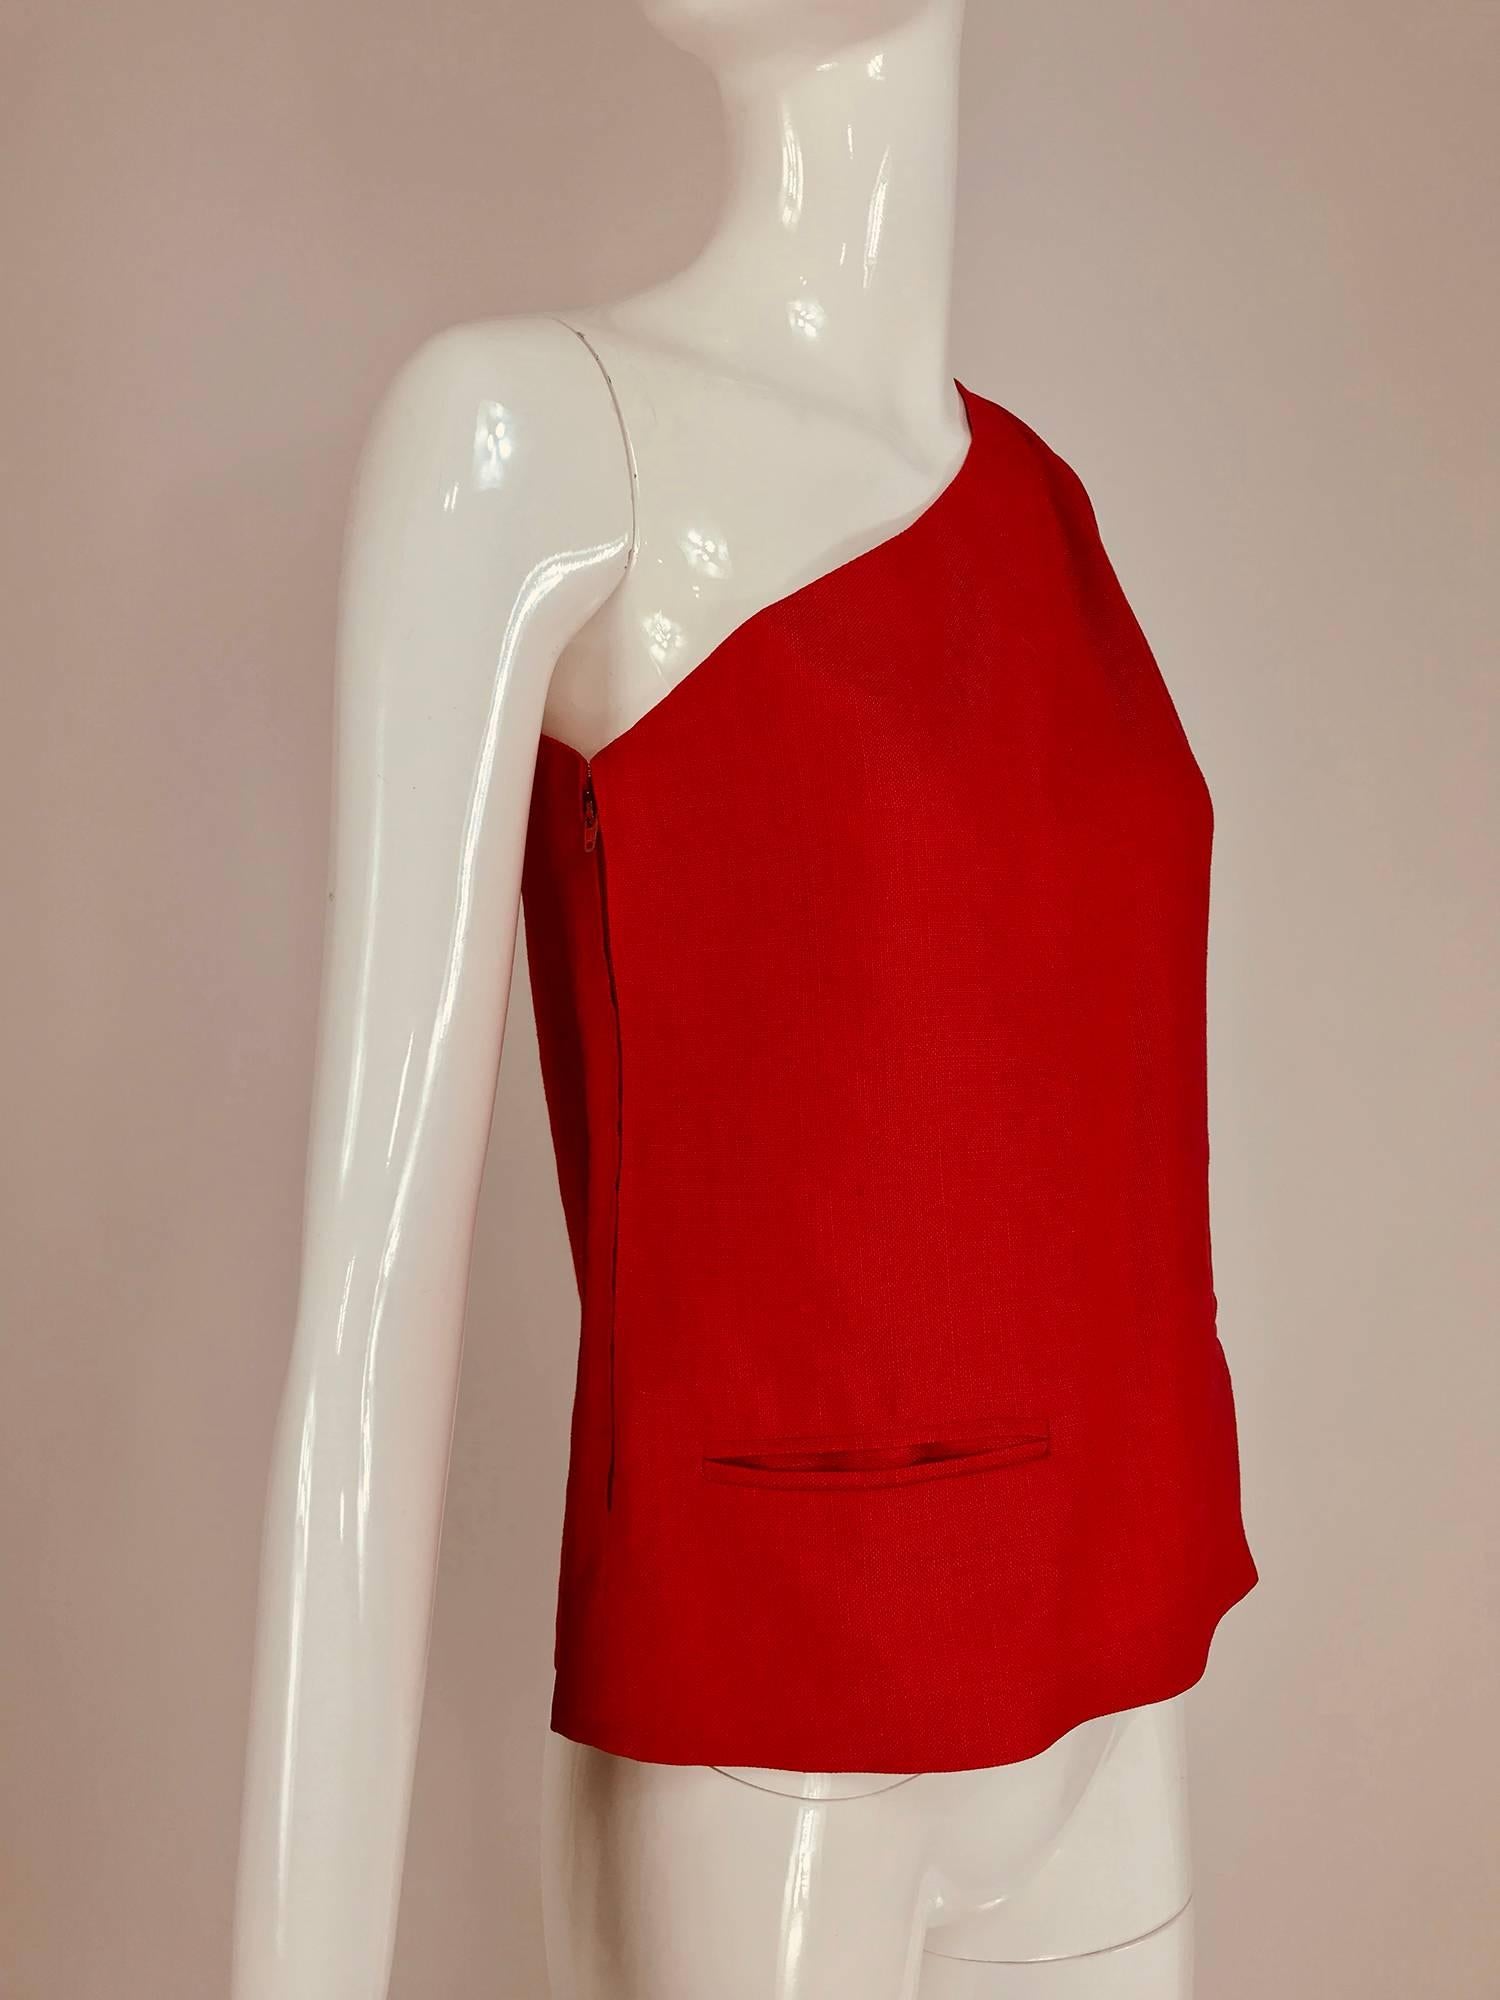 Bill Blass red linen one shoulder top from the 1970s. Bright coral red top has two besom pockets at the hip fronts. Mid weight linen. Closes at the side with a zipper and hook and eye. Looks great with white trousers.
Fits a size small.
In excellent